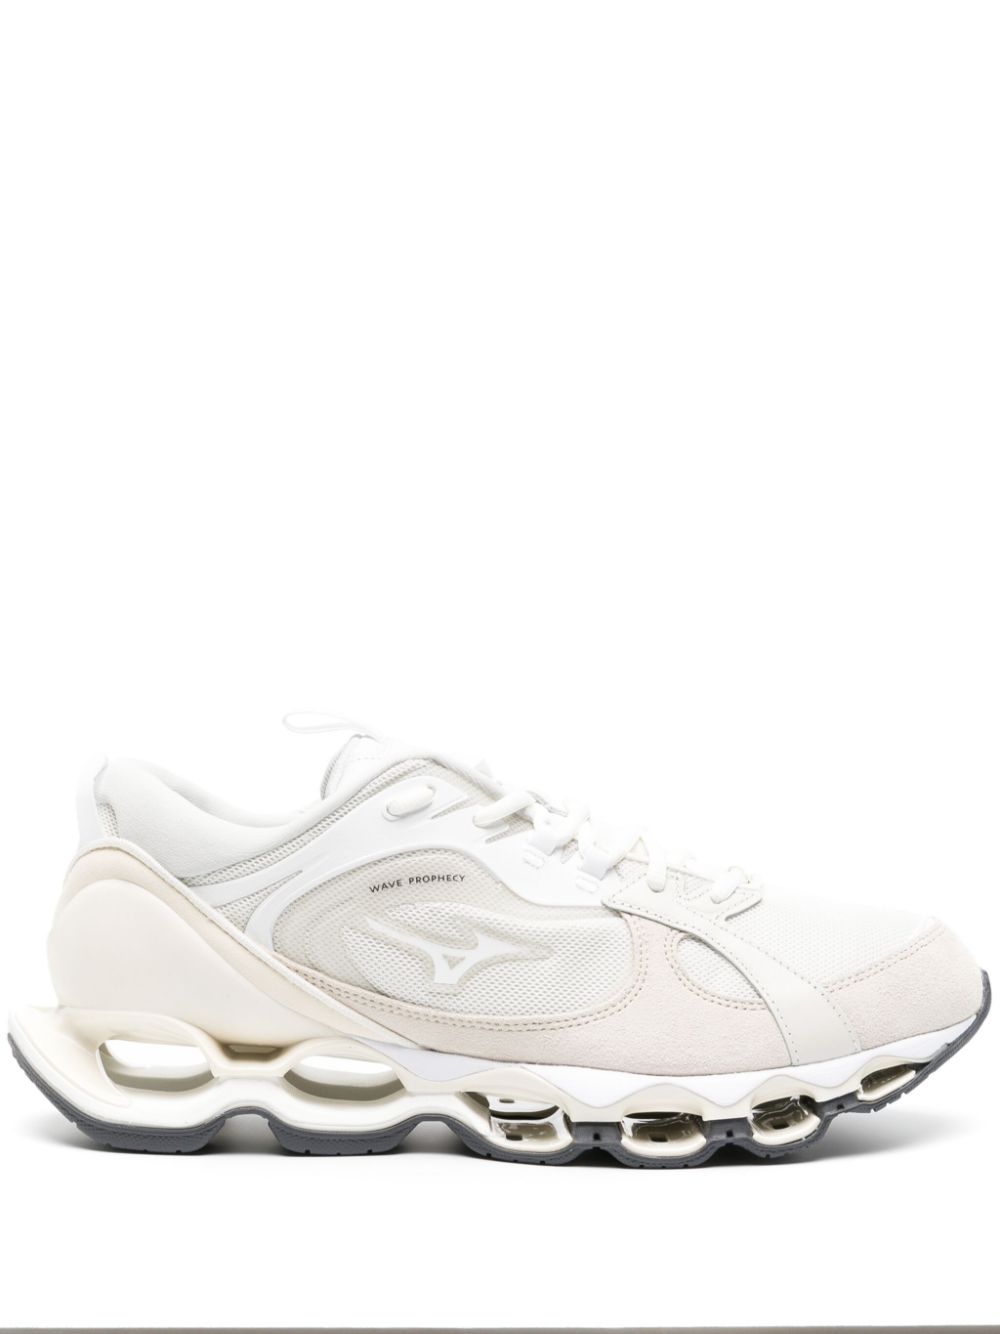 Mizuno Wave Prophecy Ss Sneakers In White